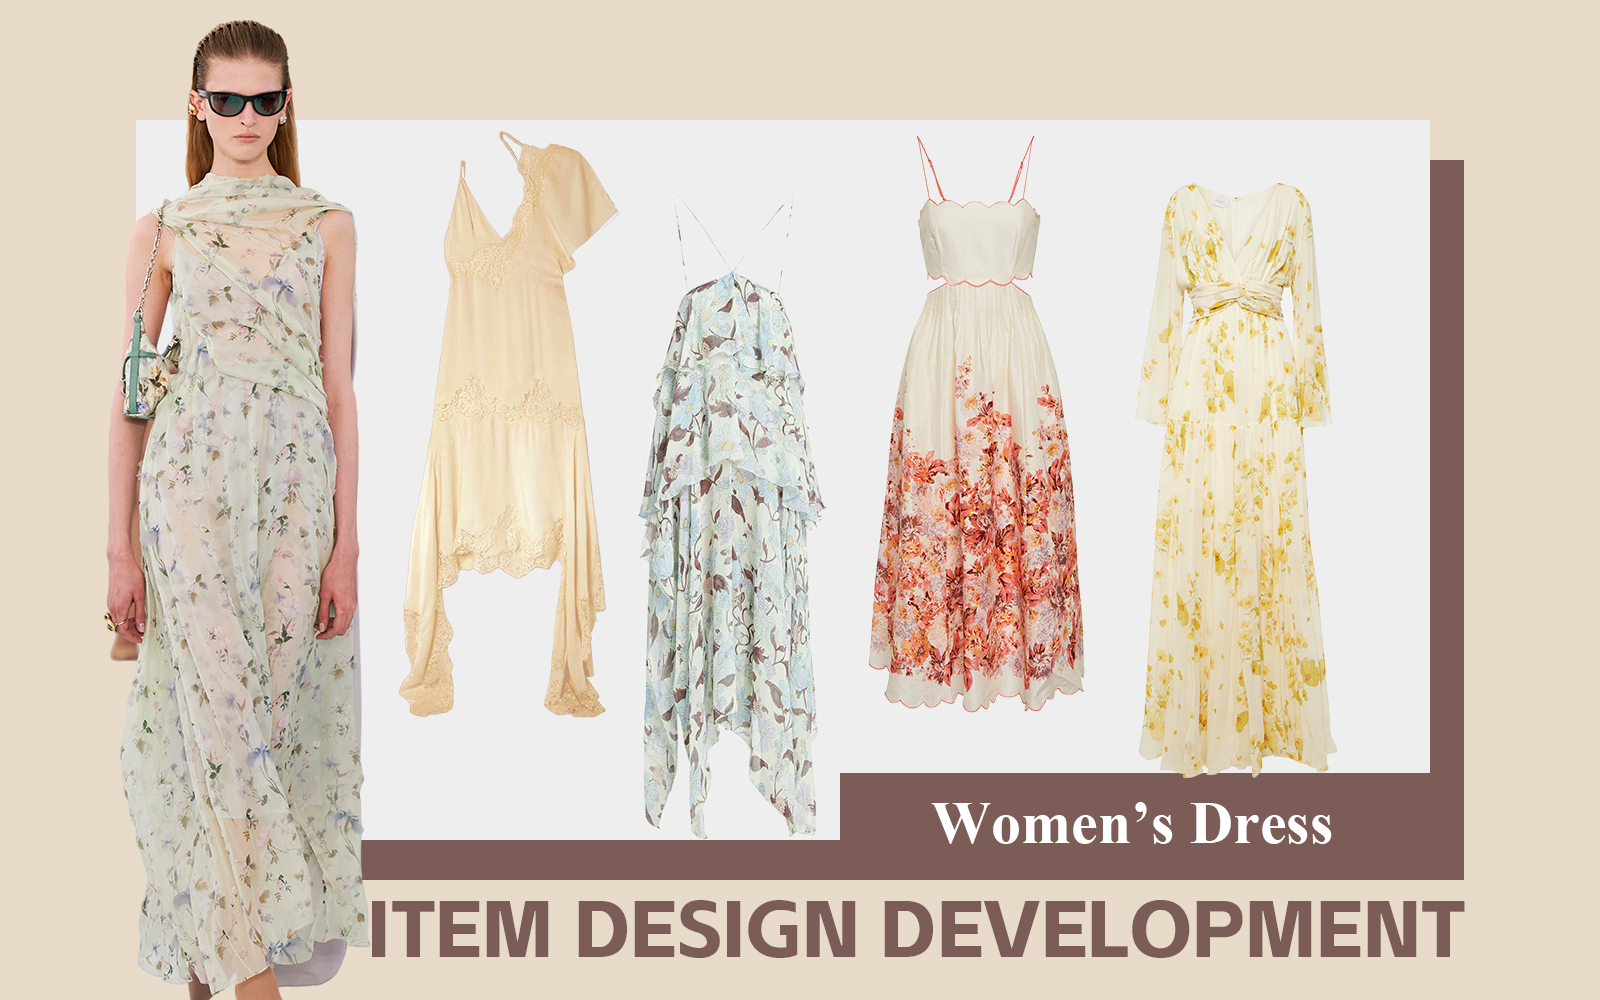 Southern French Holiday -- The Design Development of Women's Dress